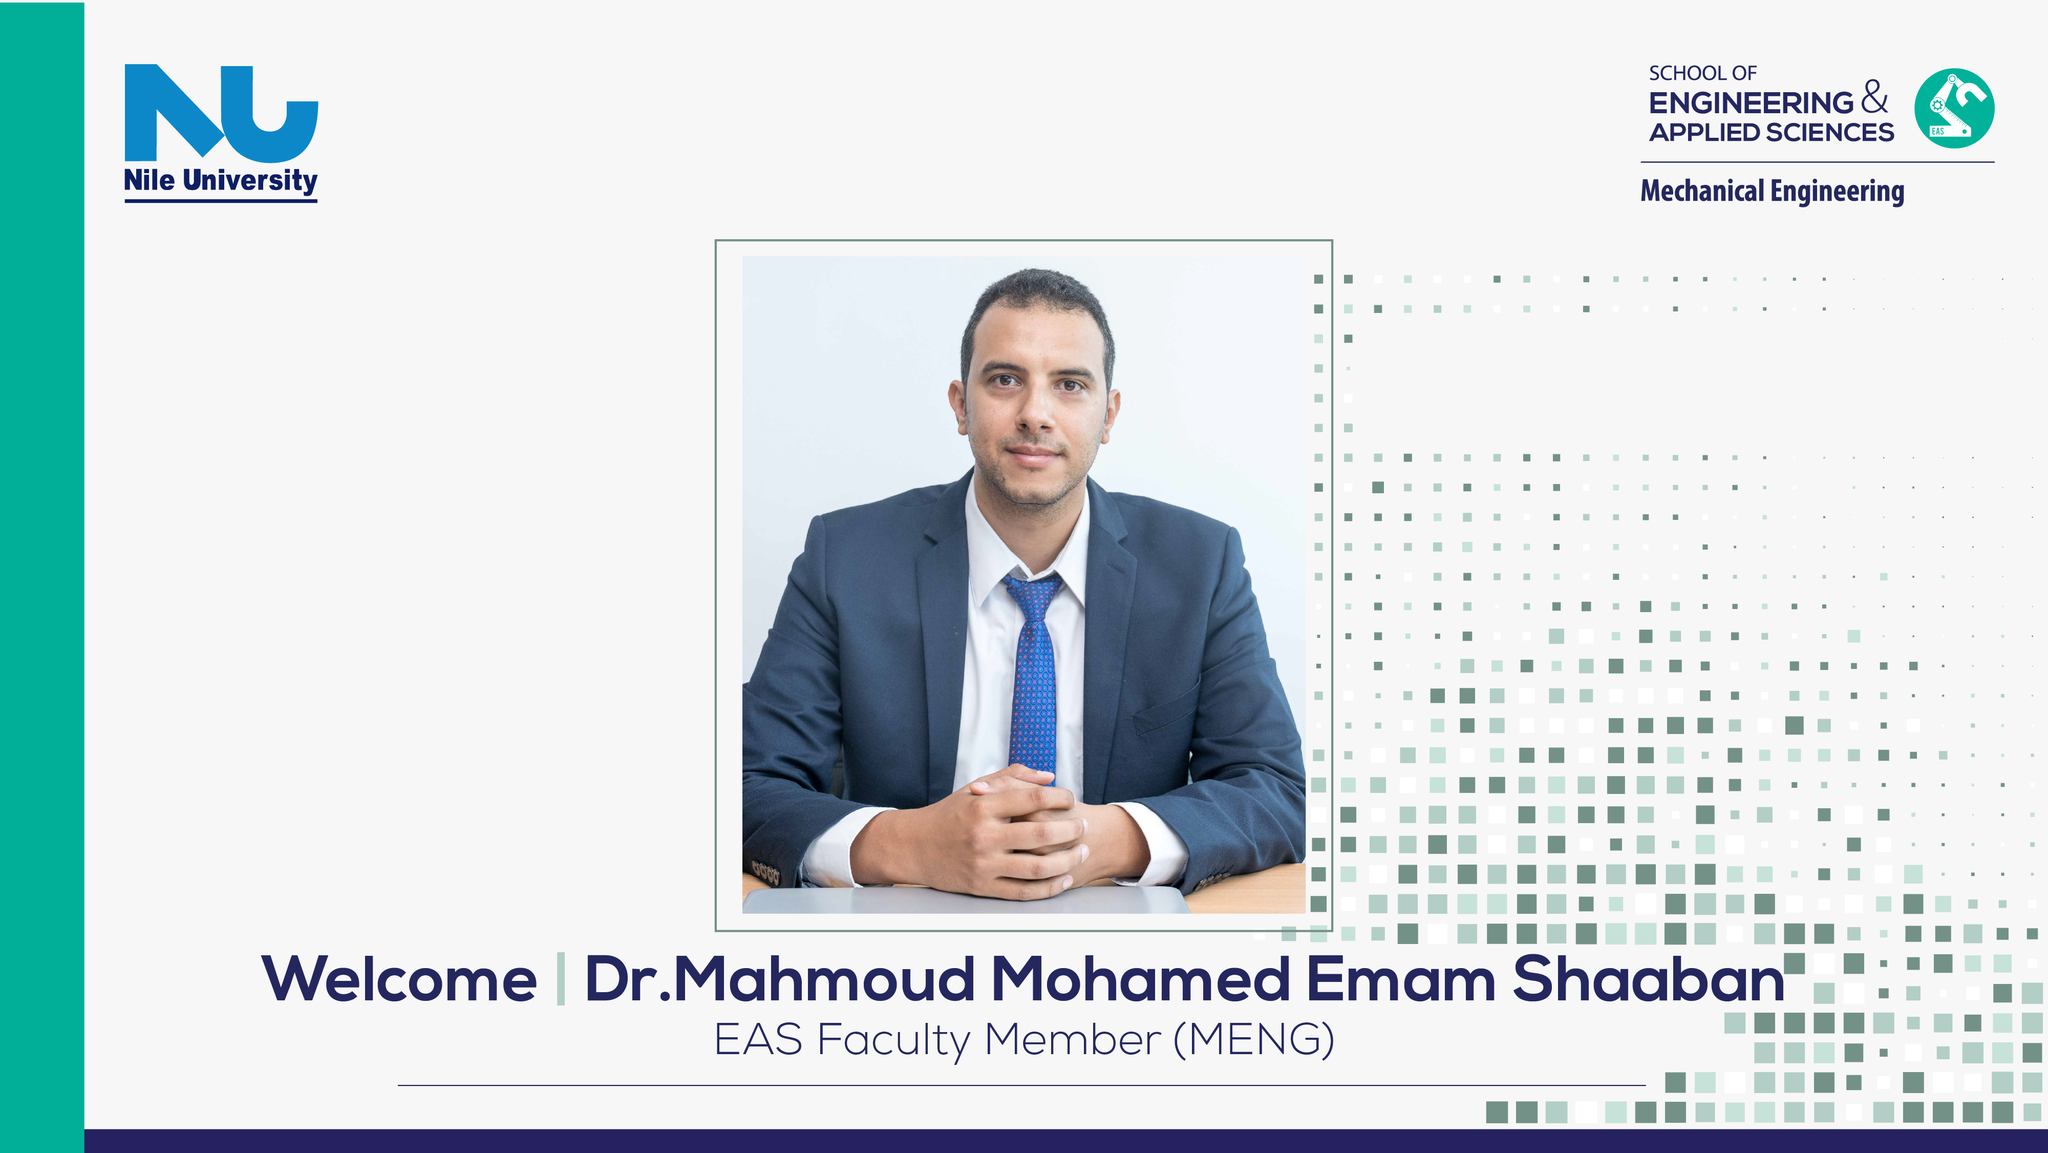 Welcome on board Dr. Mahmoud Mohamed Emam Shaaban as Assistant Professor in Mechanical Program at School of Engineering - Nile University